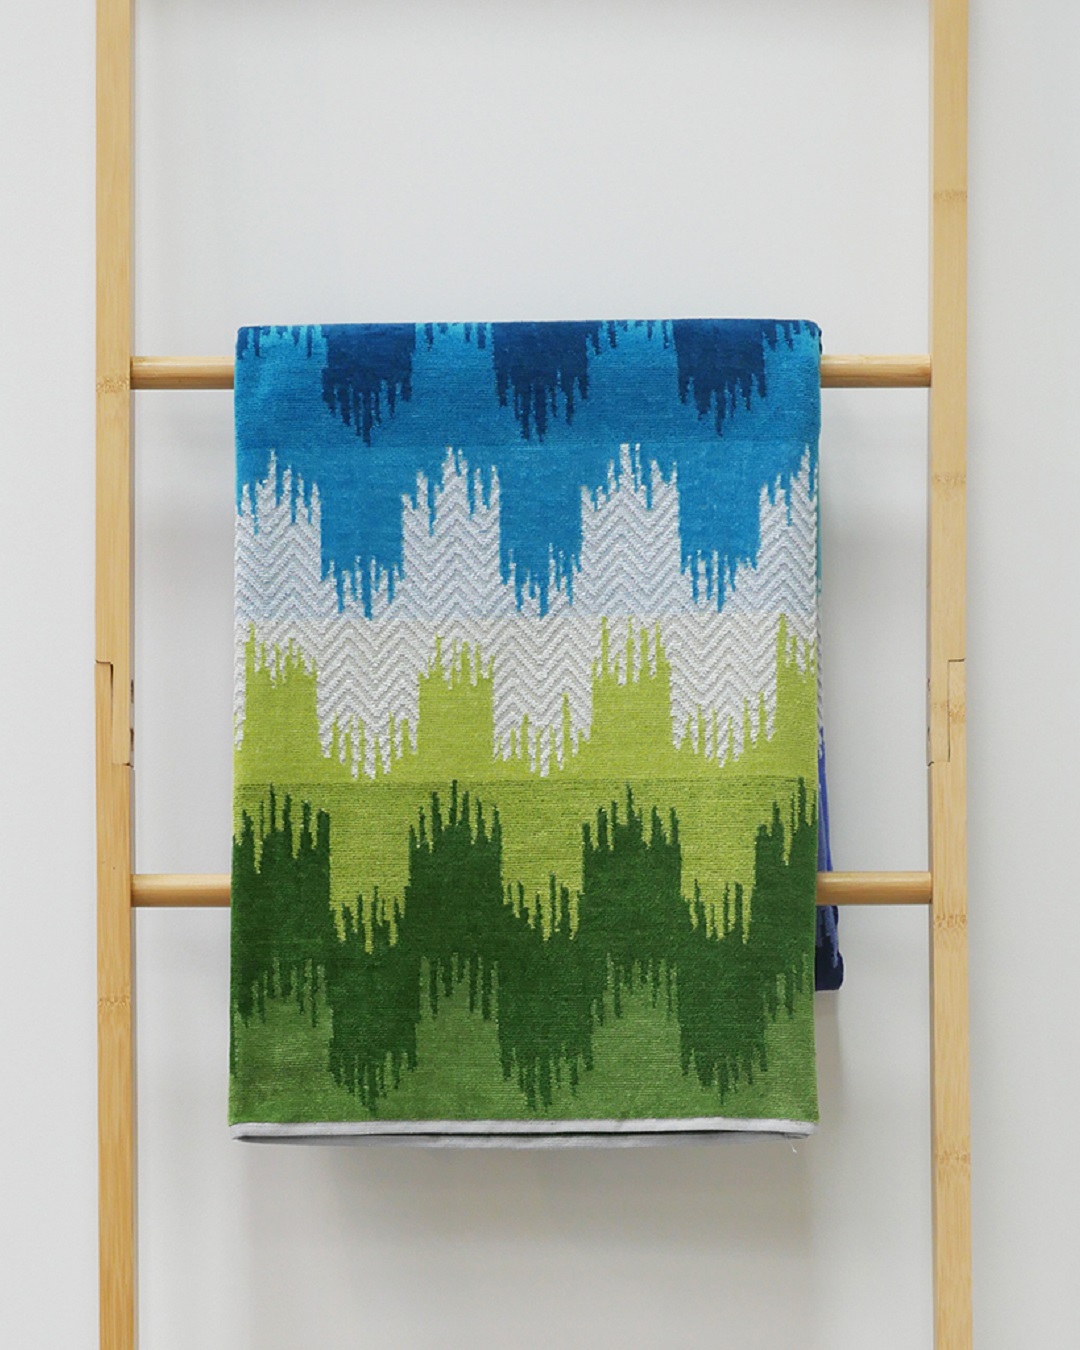 Colourful beach towel hanging on rack